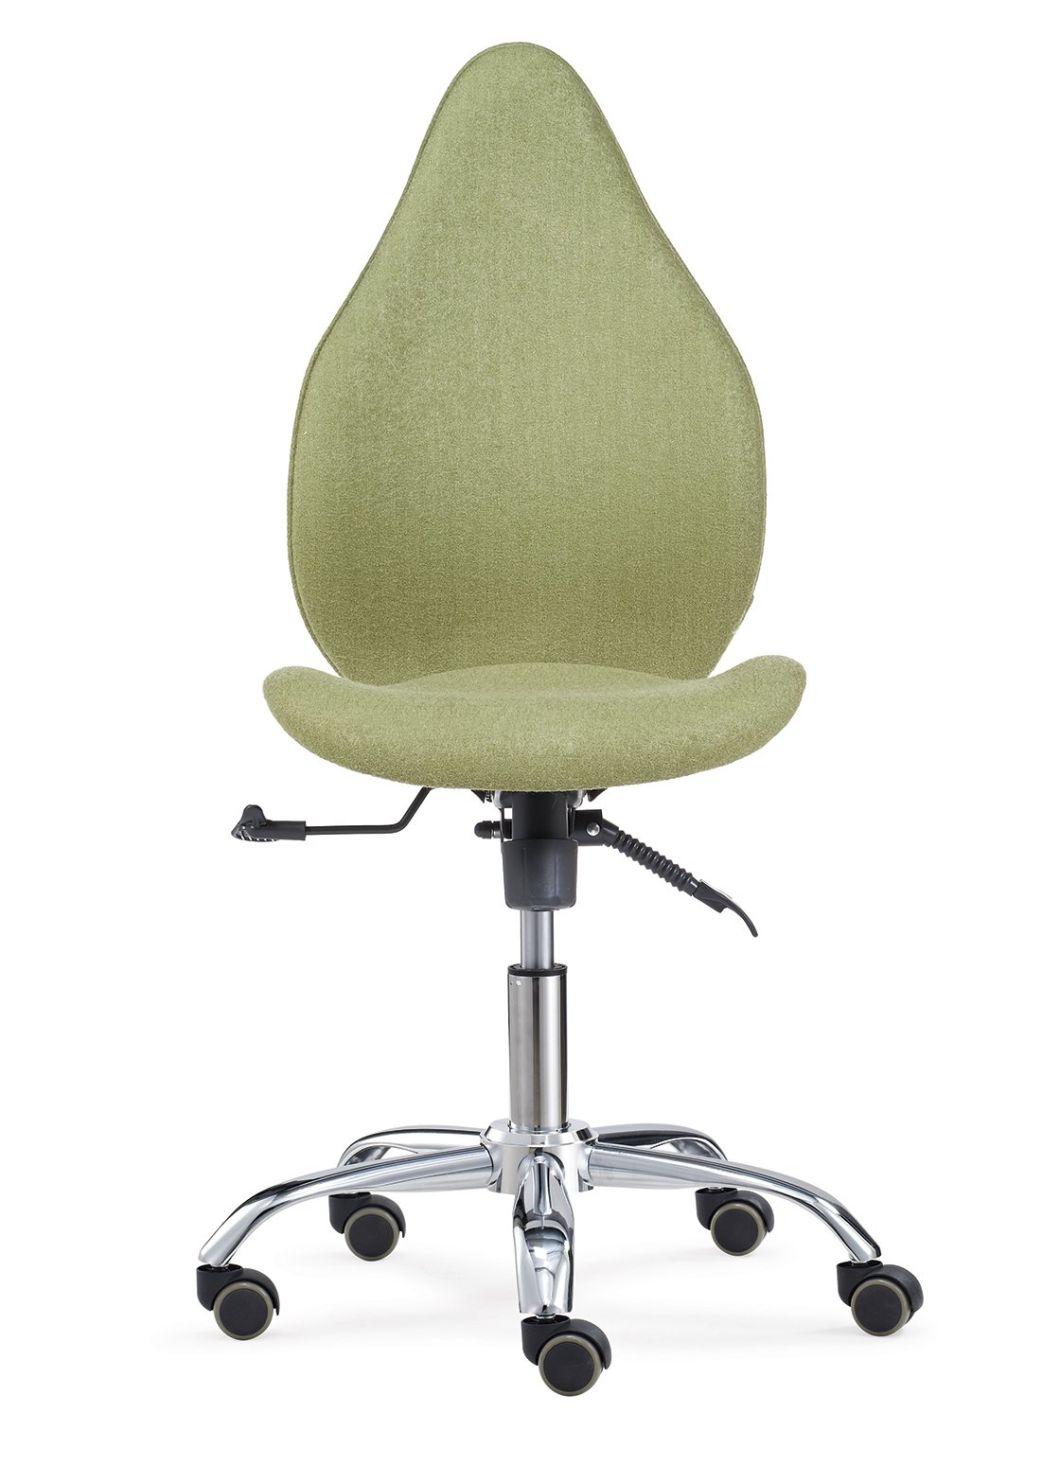 Ergonomic Leisure Fabric Office Chair with Highback